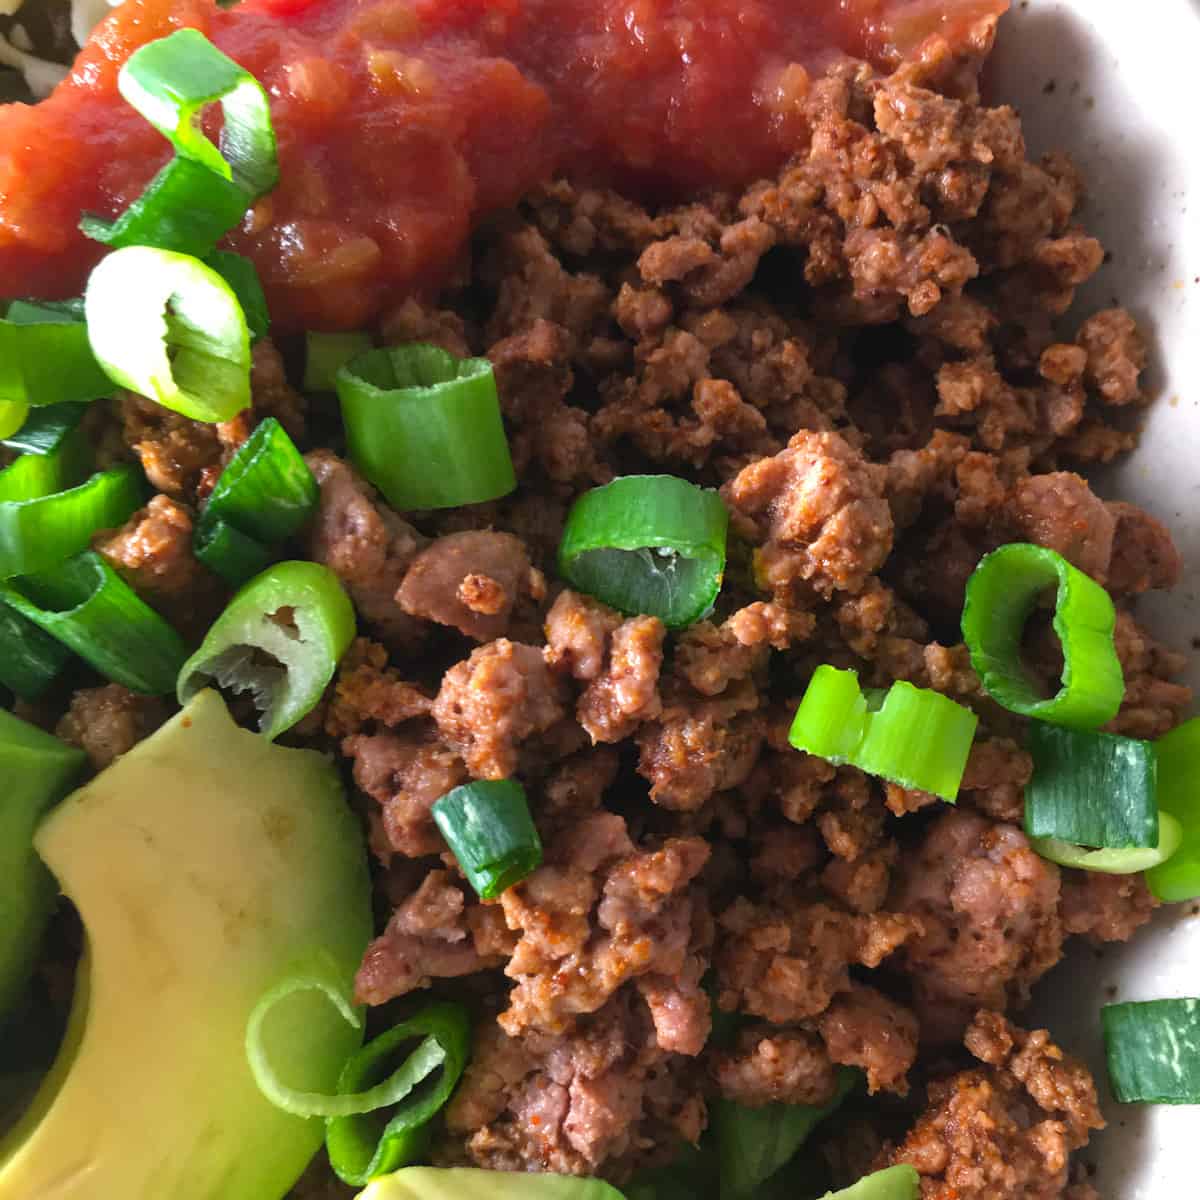 How to crumble your ground beef when making taco meat - Quora